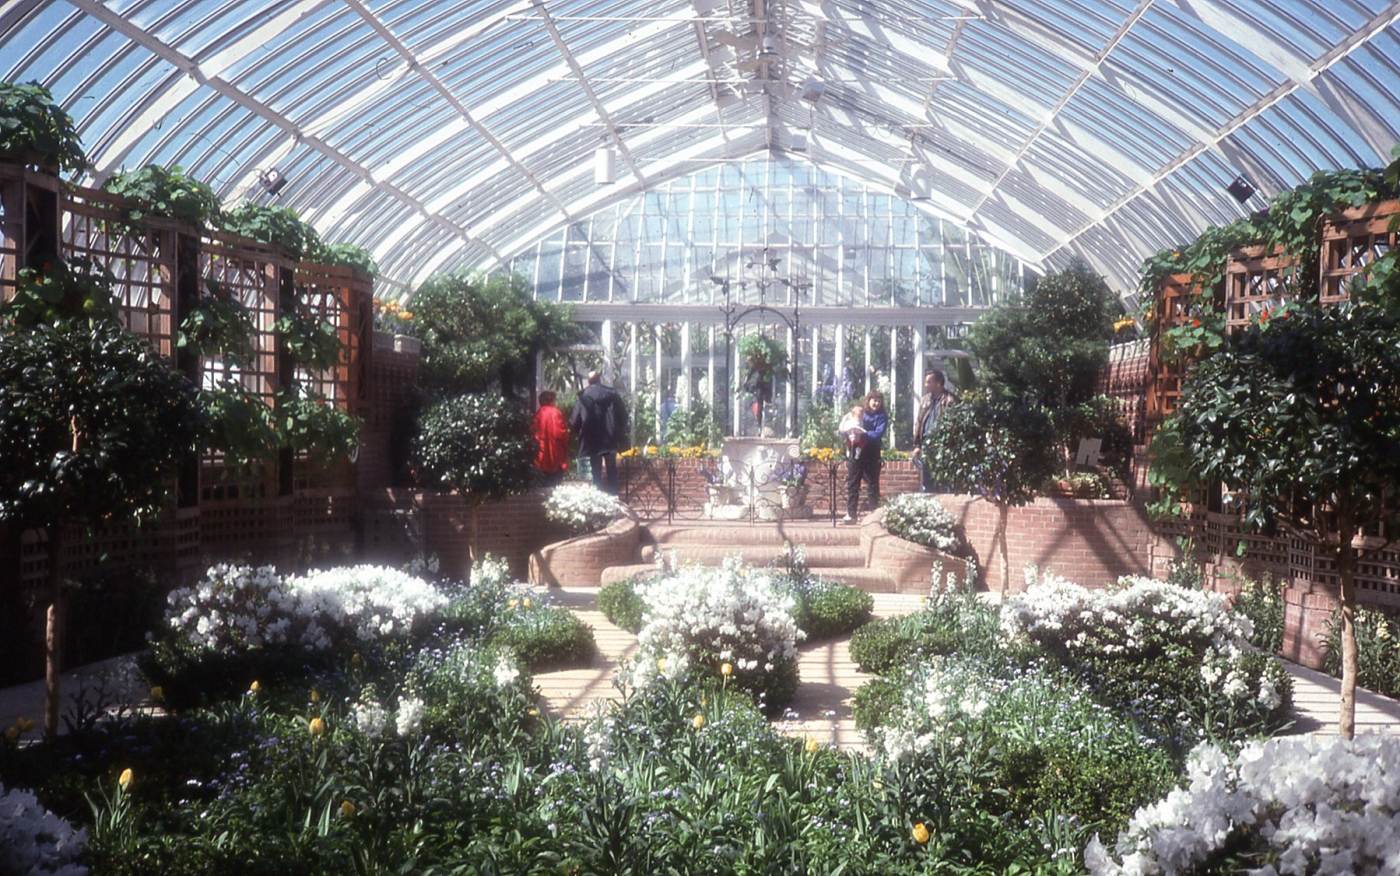 History of Phipps